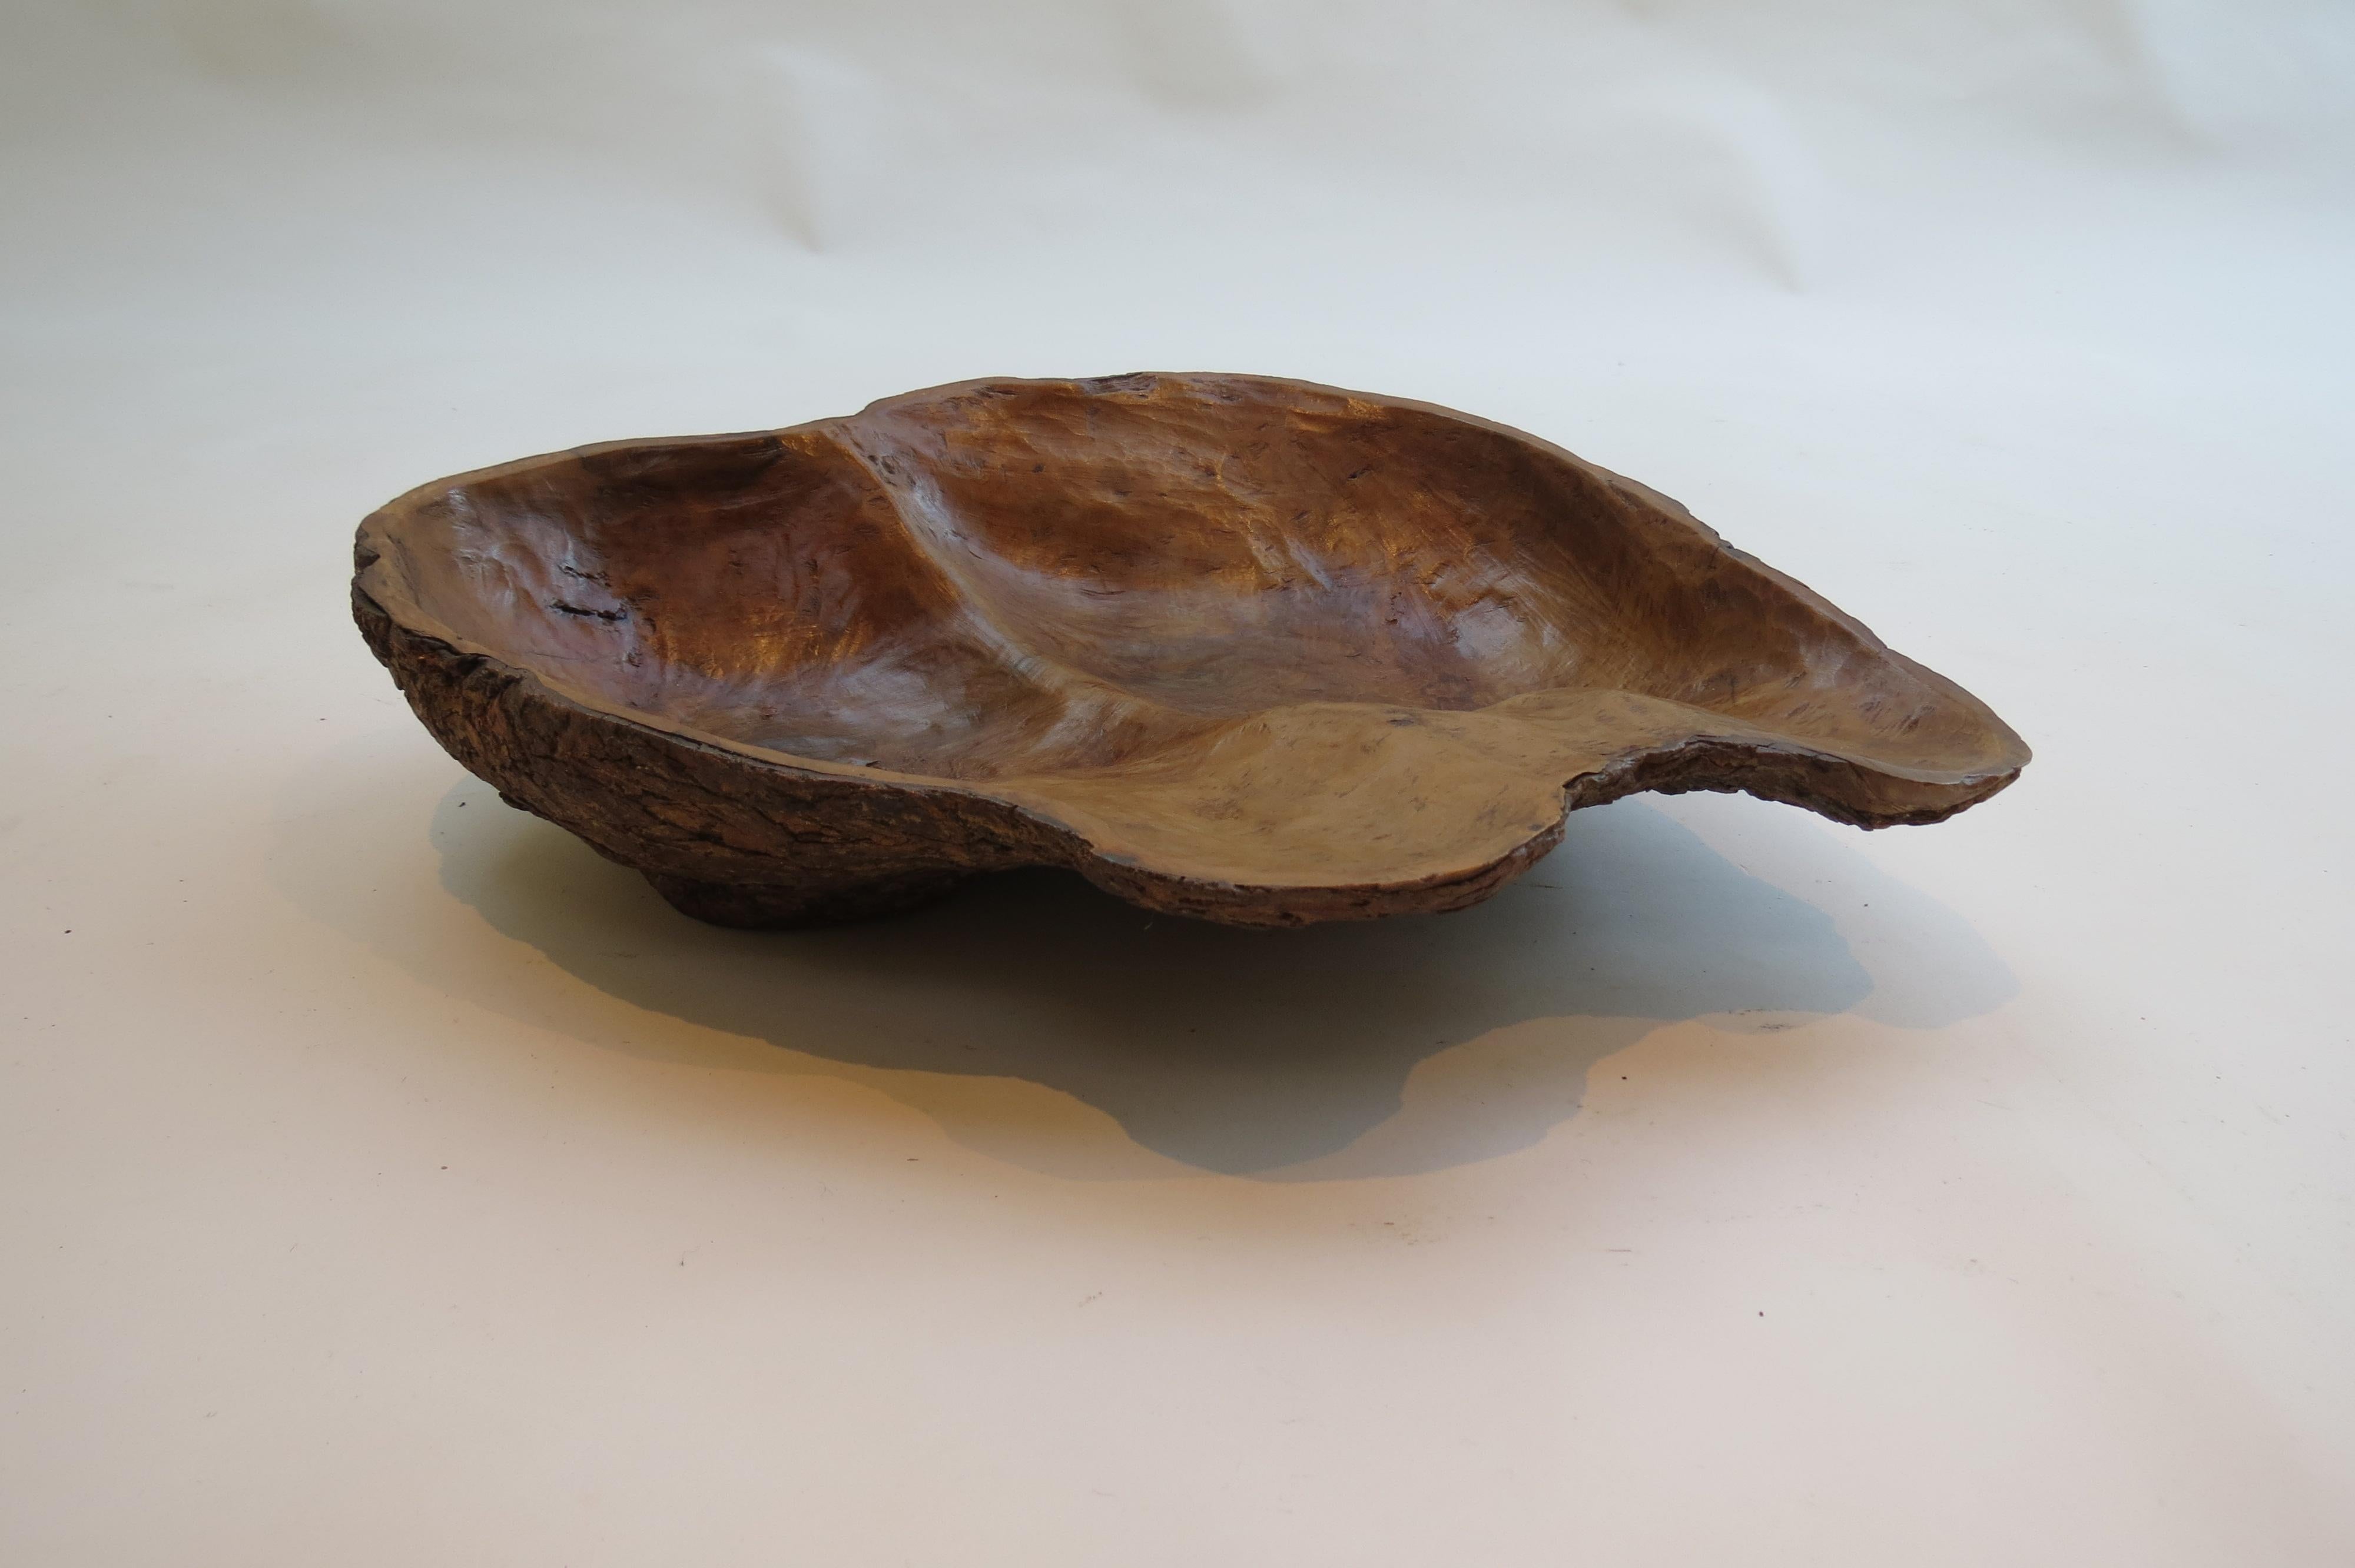 1970s Wooden Bowl Made from Olive Wood (Rustikal)